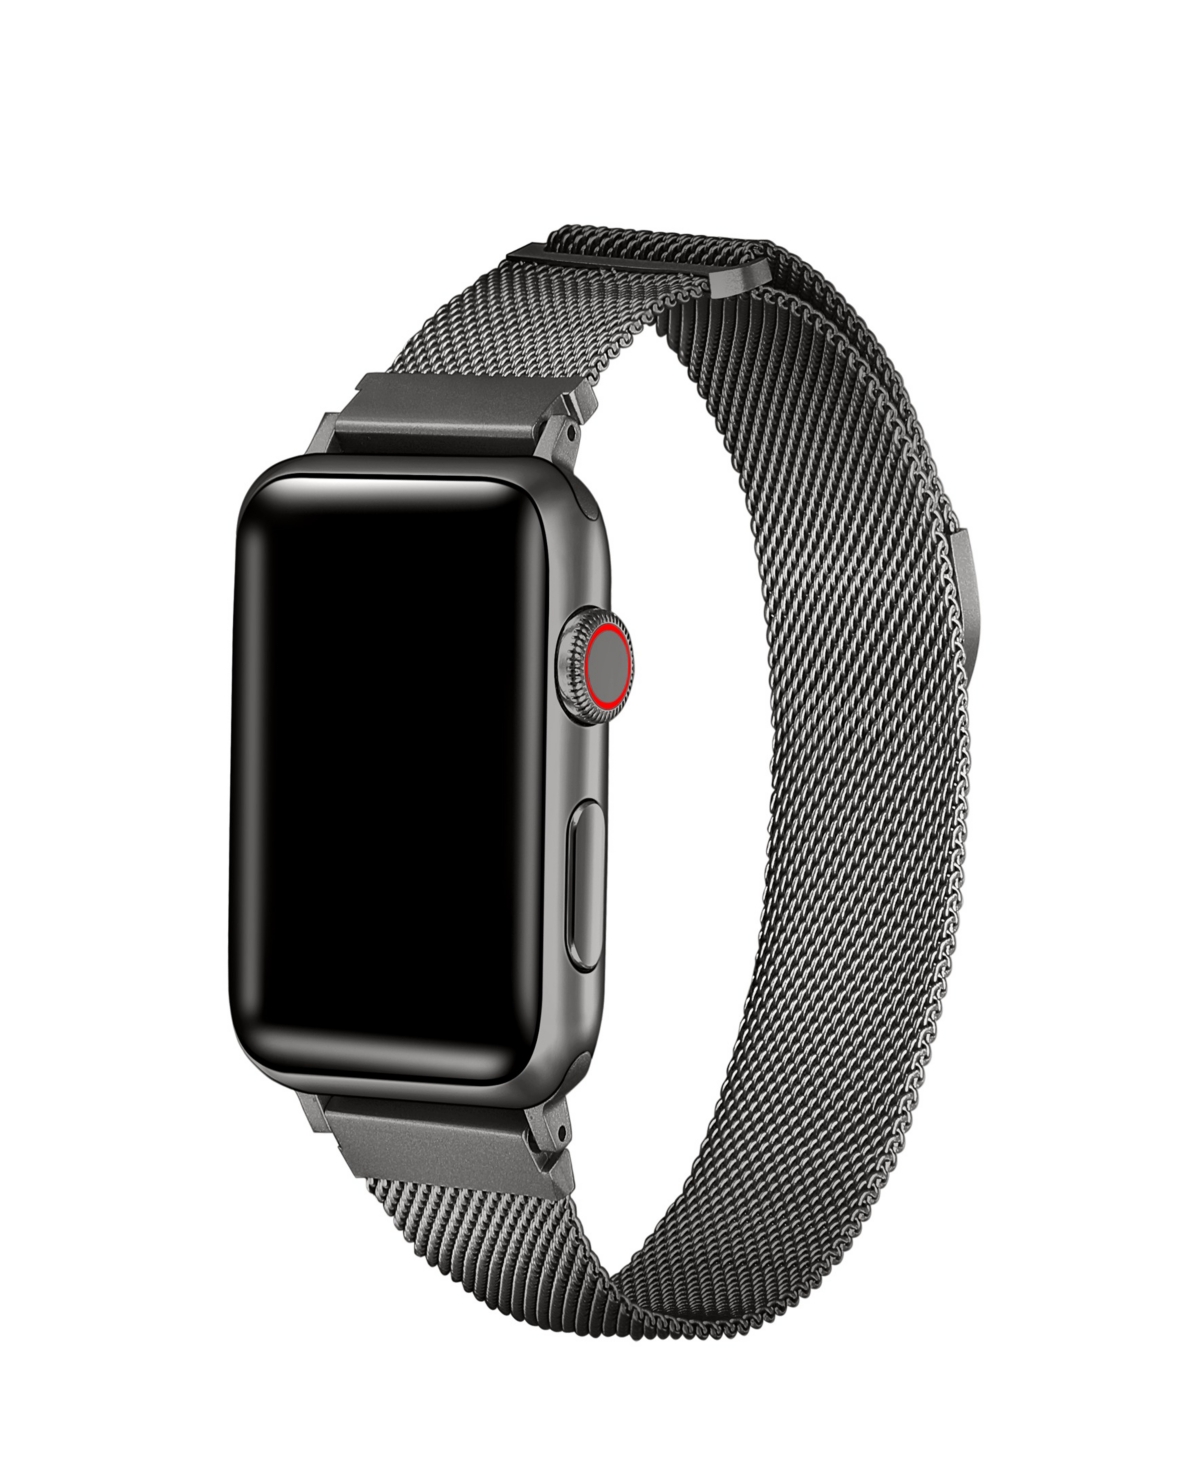 Posh Tech Unisex Milanese Graphite Stainless Steel Mesh 2 Piece Strap For Apple Watch Sizes